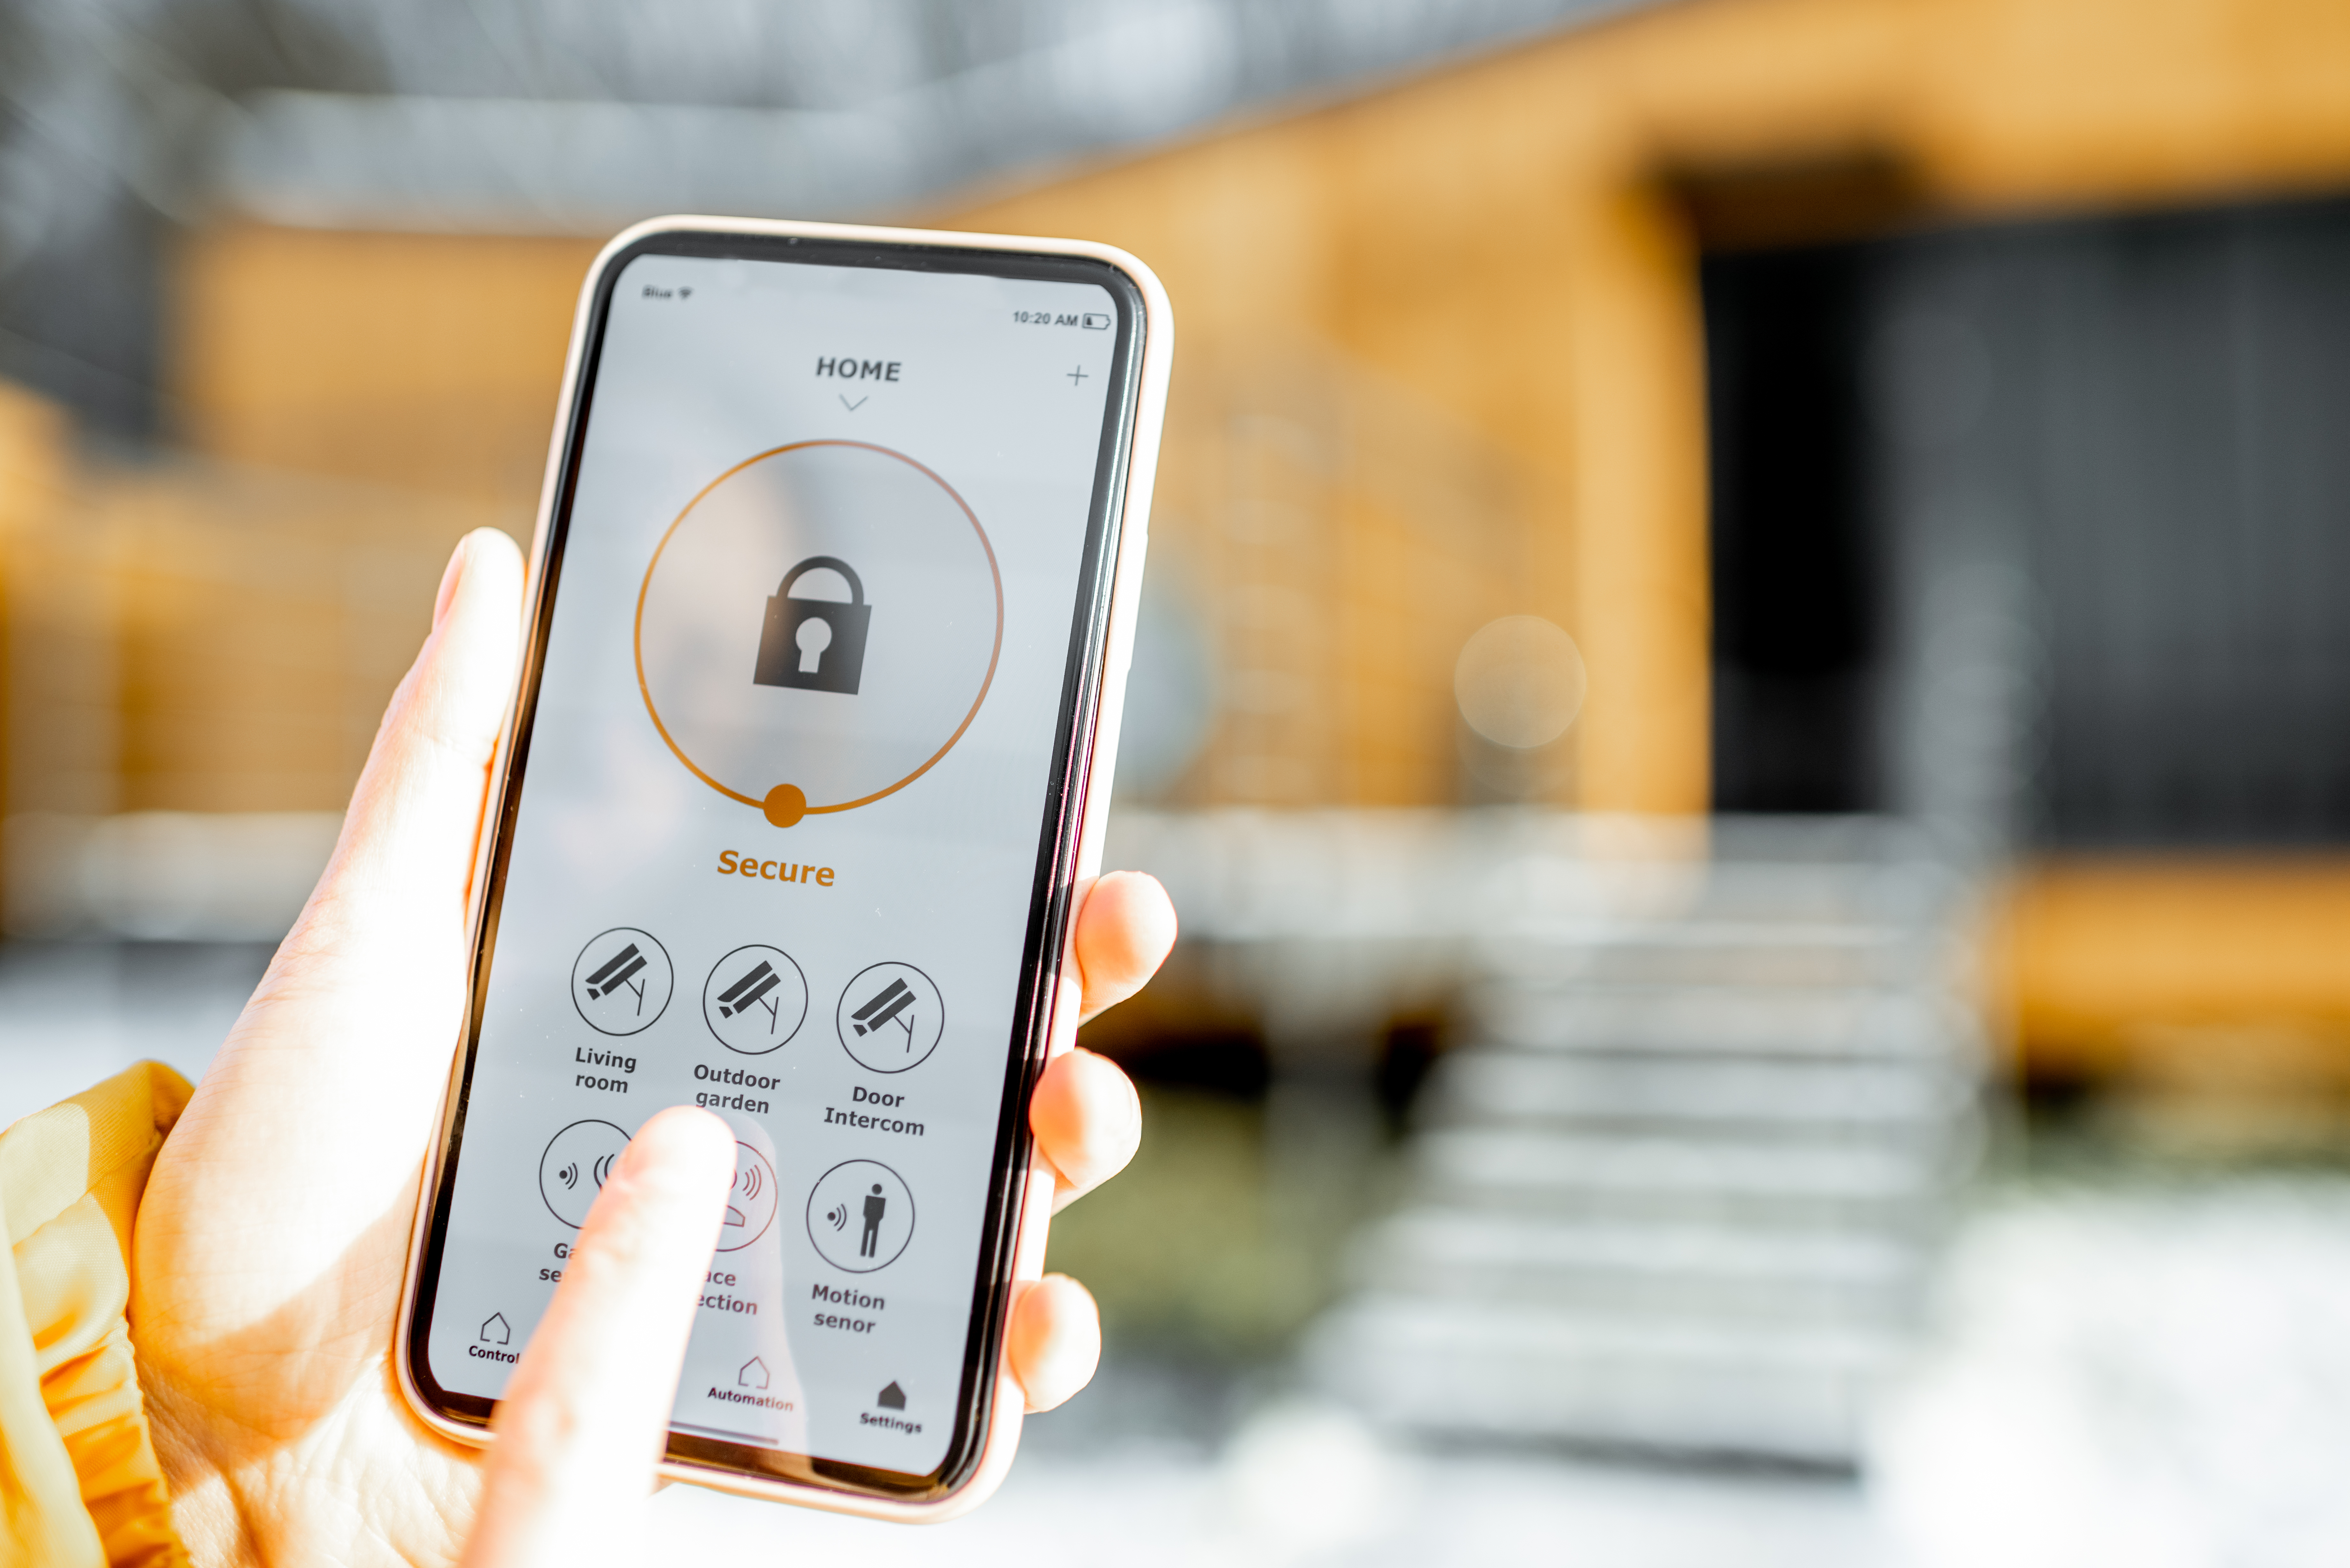 Nest Home Security System in Scottsdale Arizona | Home Security Devices